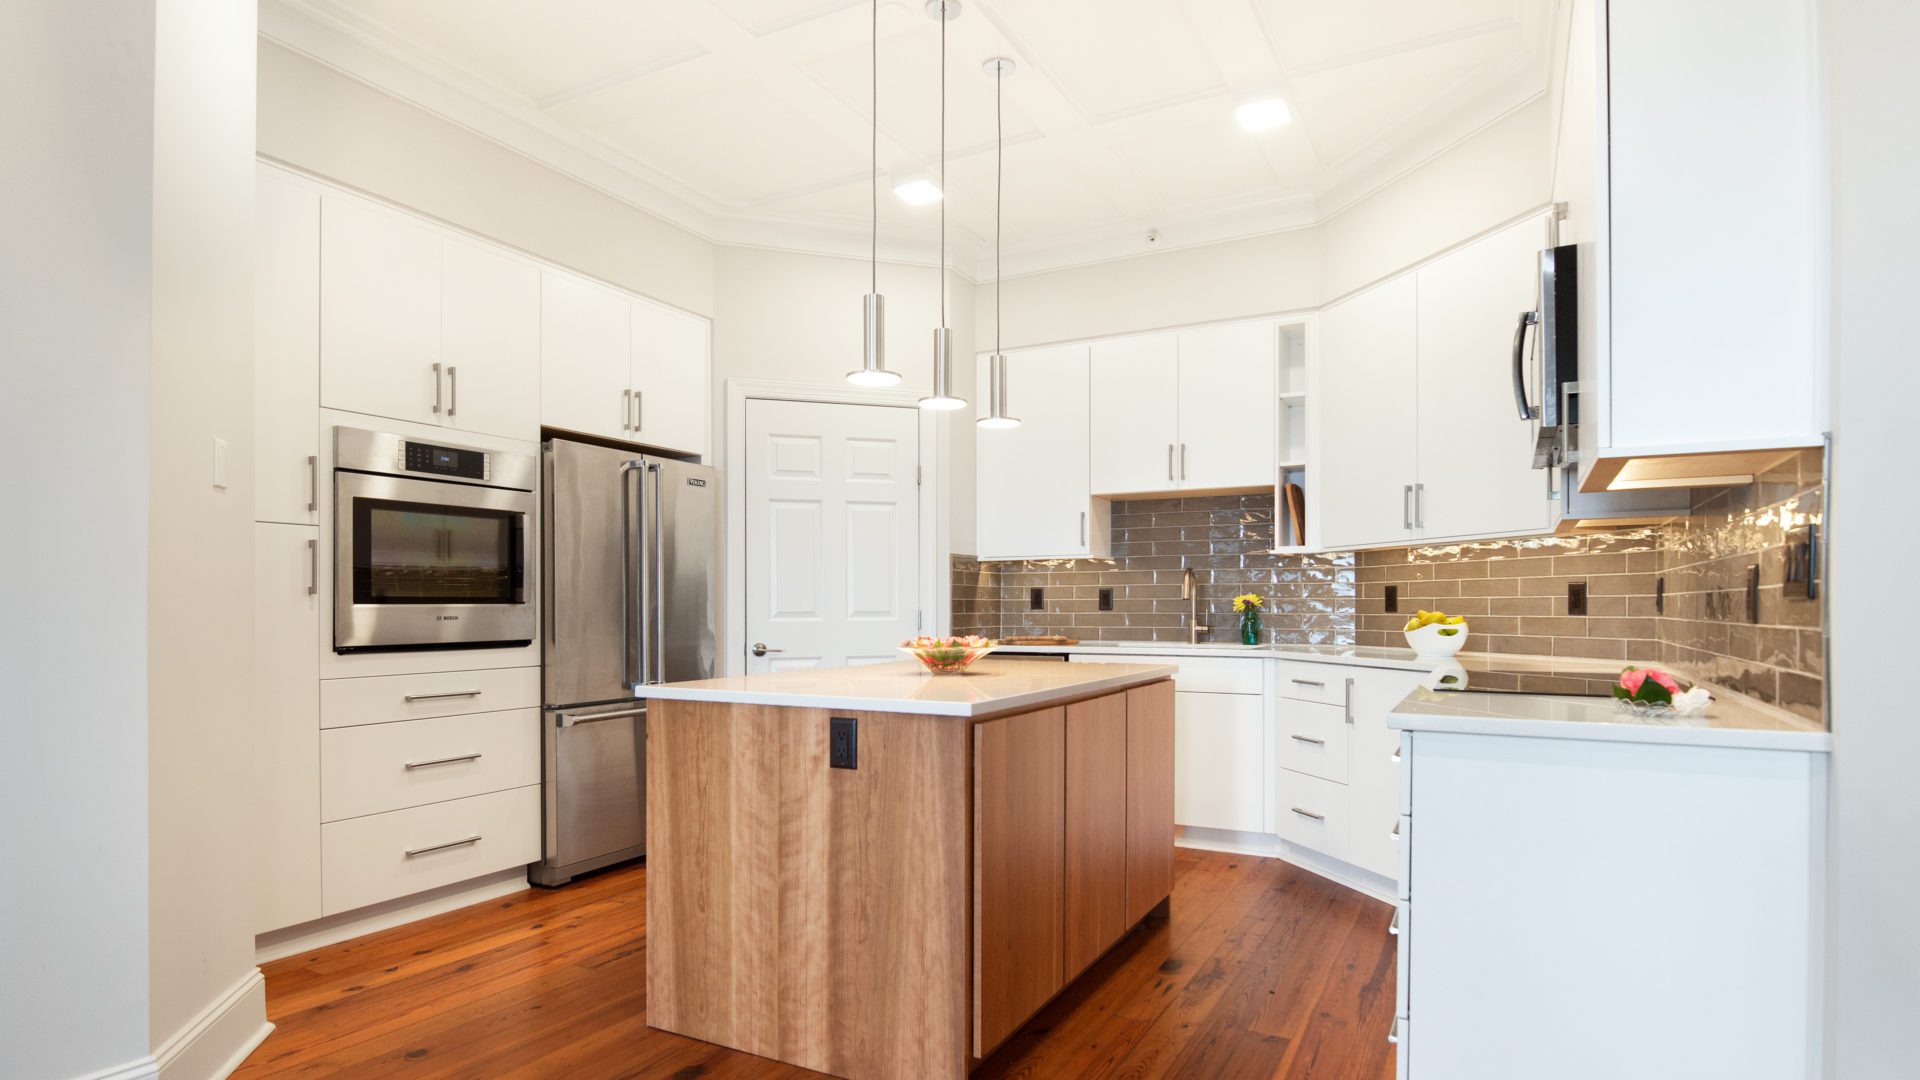 A Modern Kitchen in the Heart of Historic Charleston